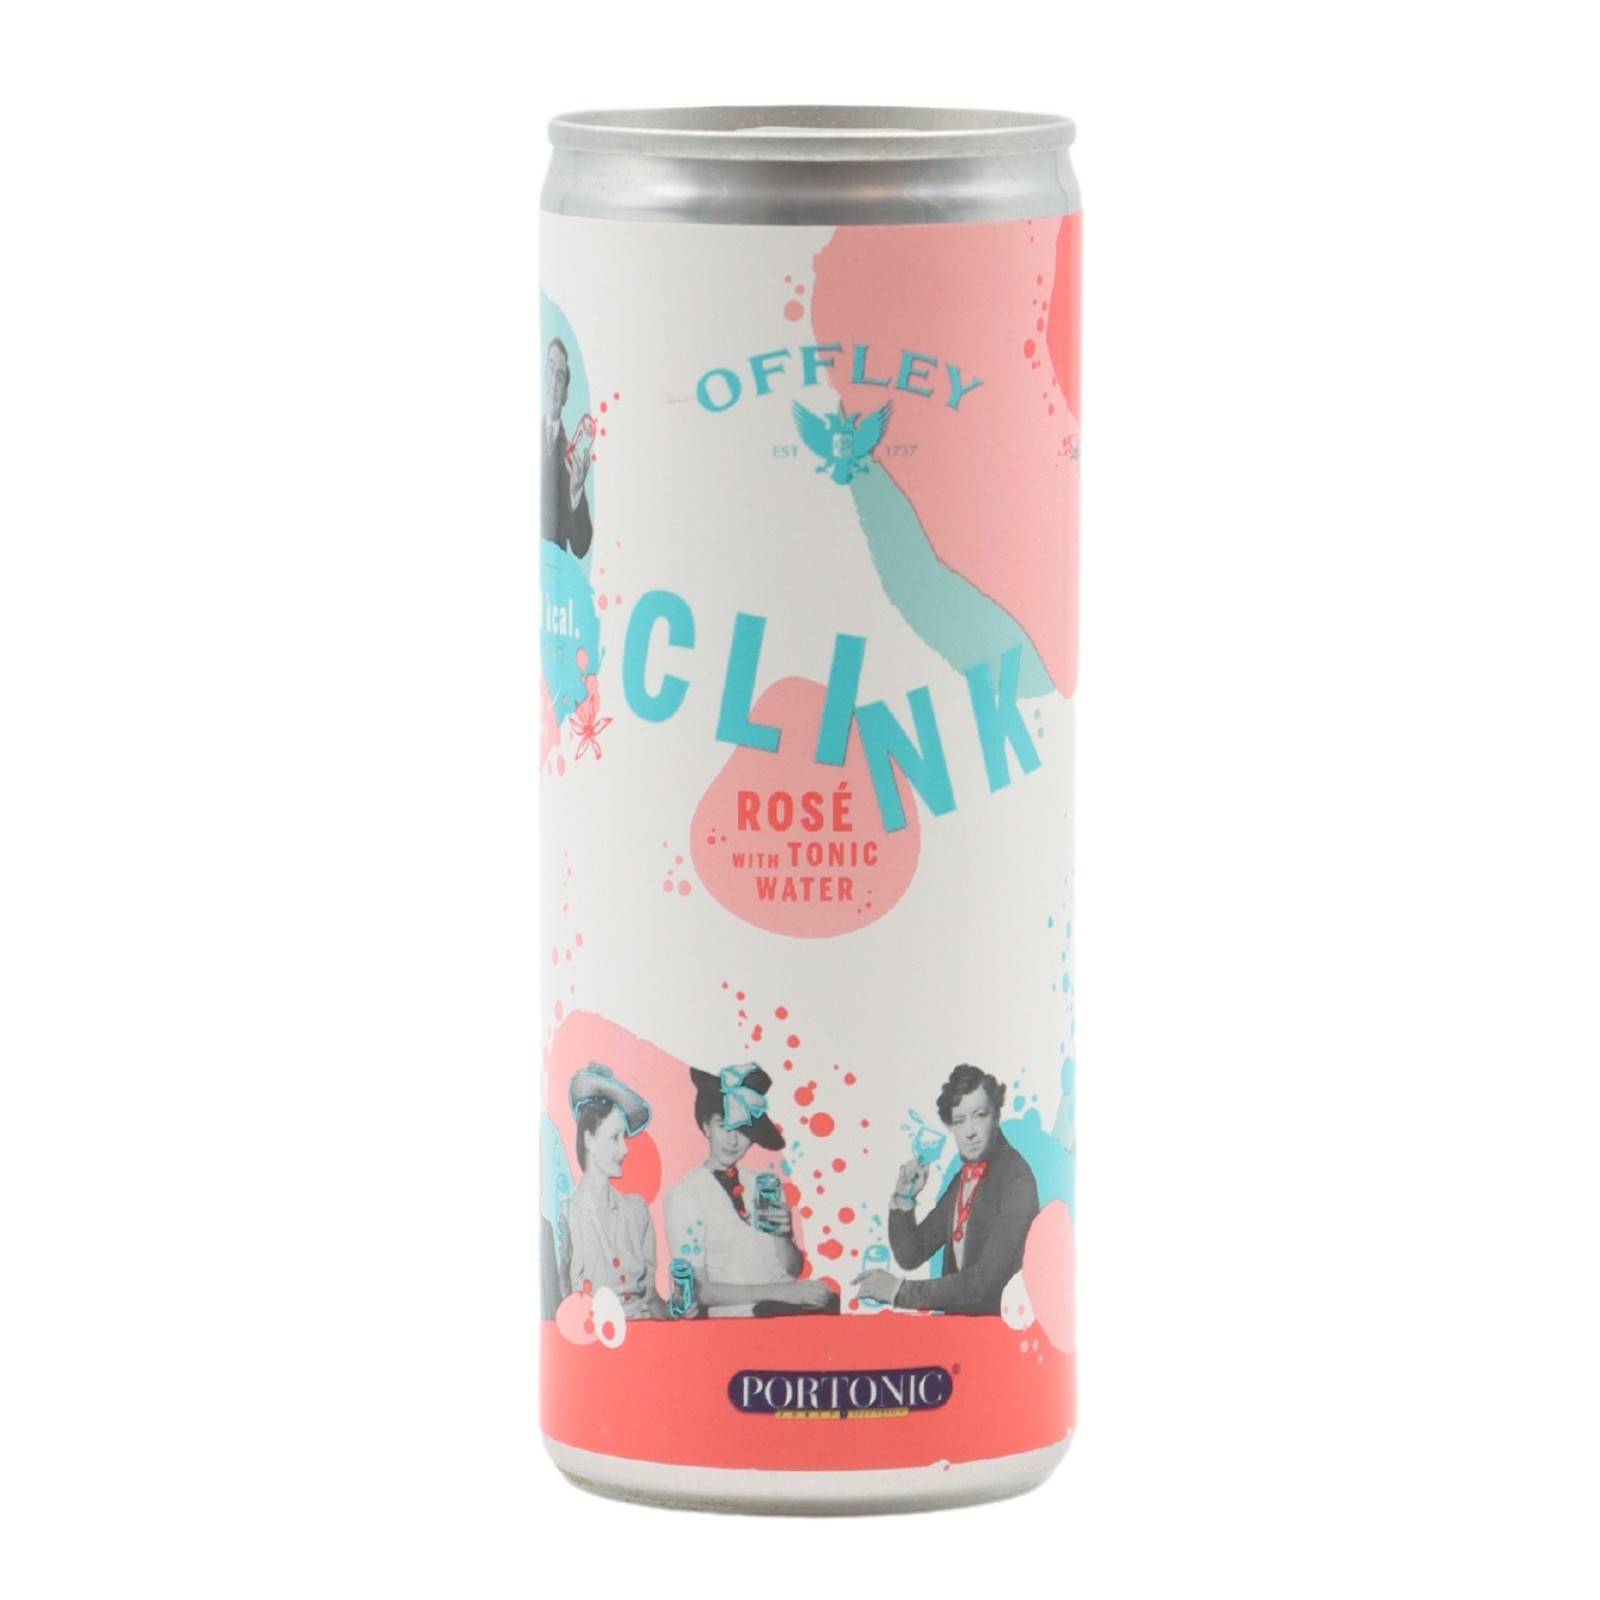 Offley Clink Rosé Portonic in can